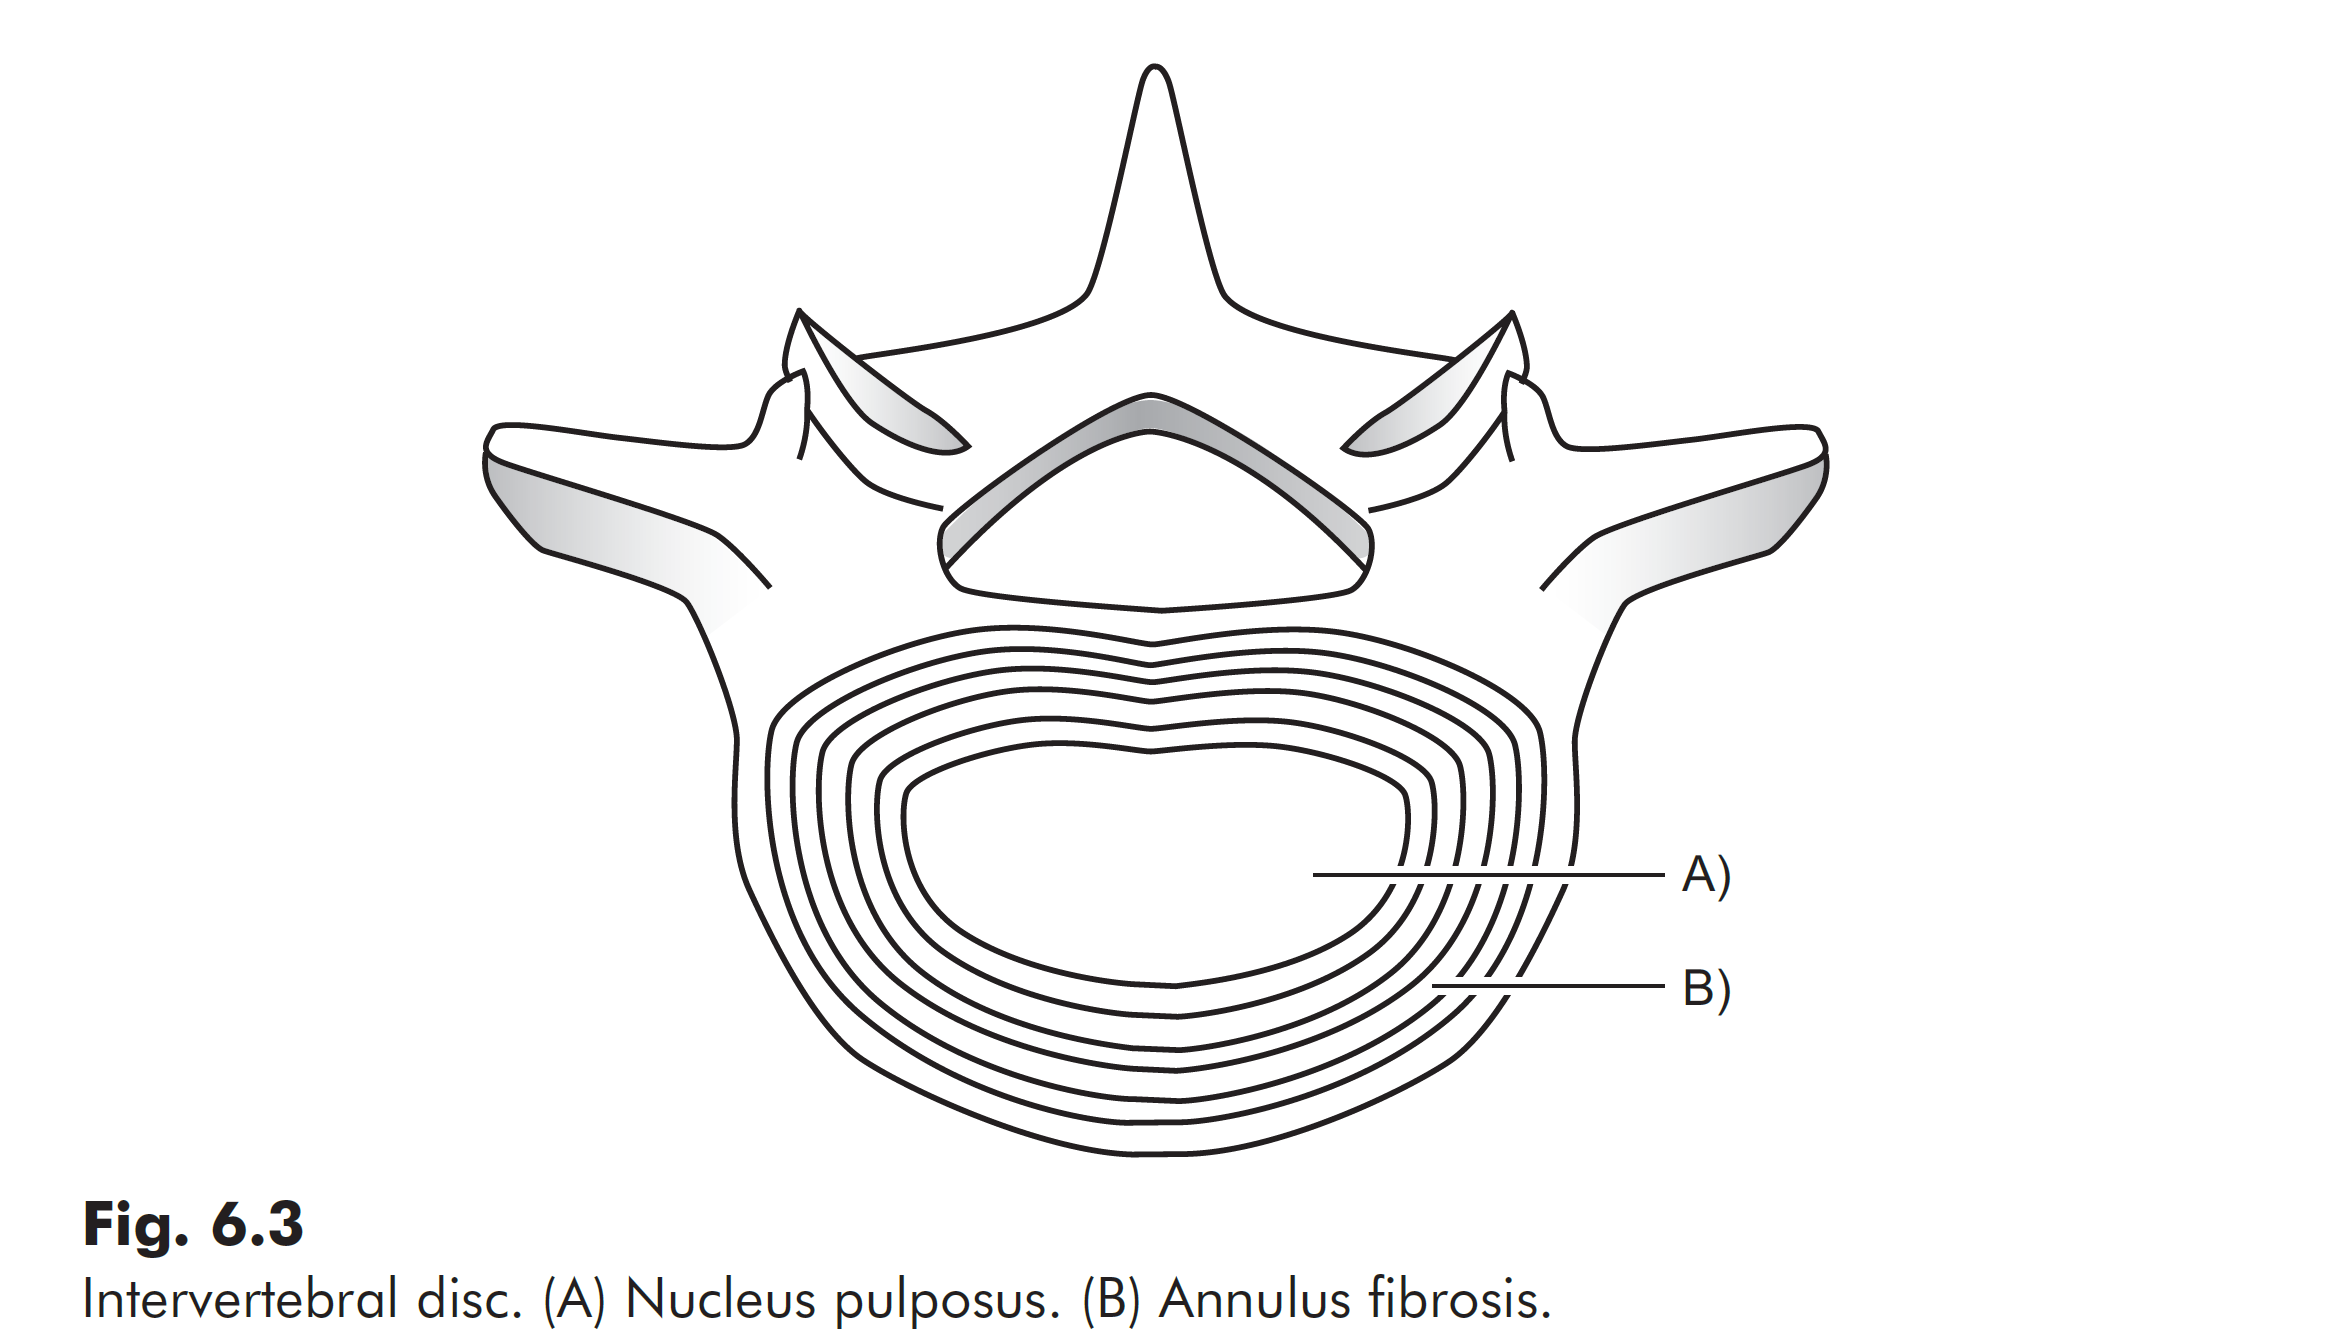 A sketch of a vertebral disc pointing to the nucleus pulposus and the annulus fibrosis